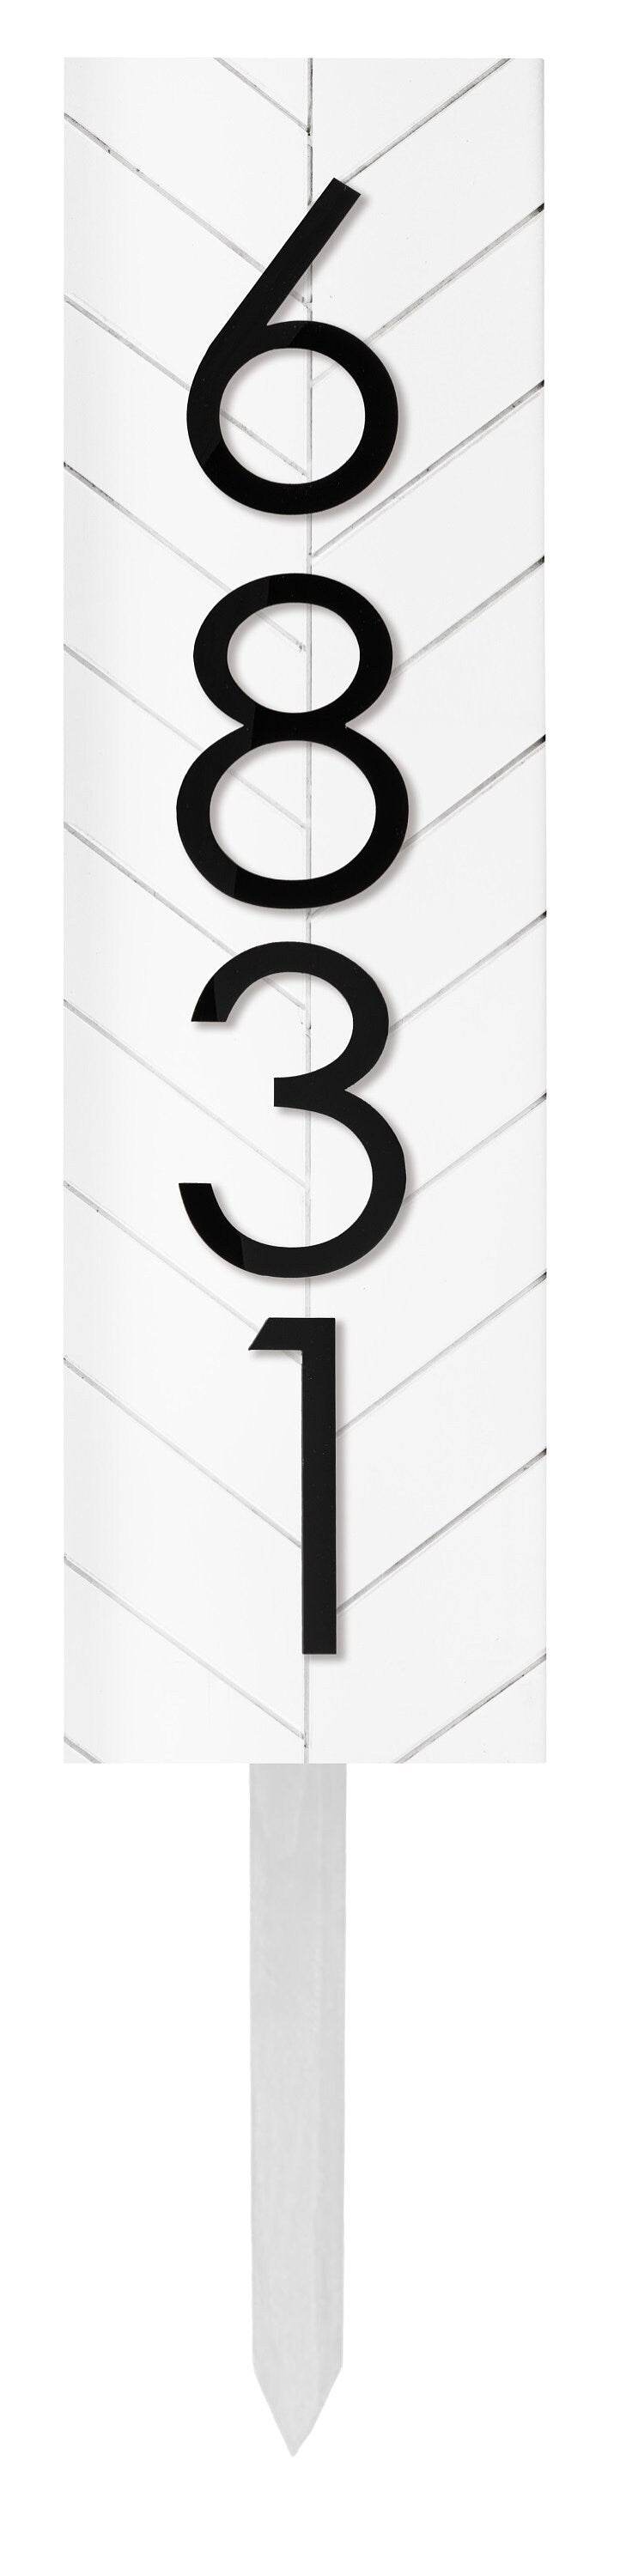 Rochester Personalized Address Plaque - Vertical House Number Sign for a Memorable Housewarming Gift